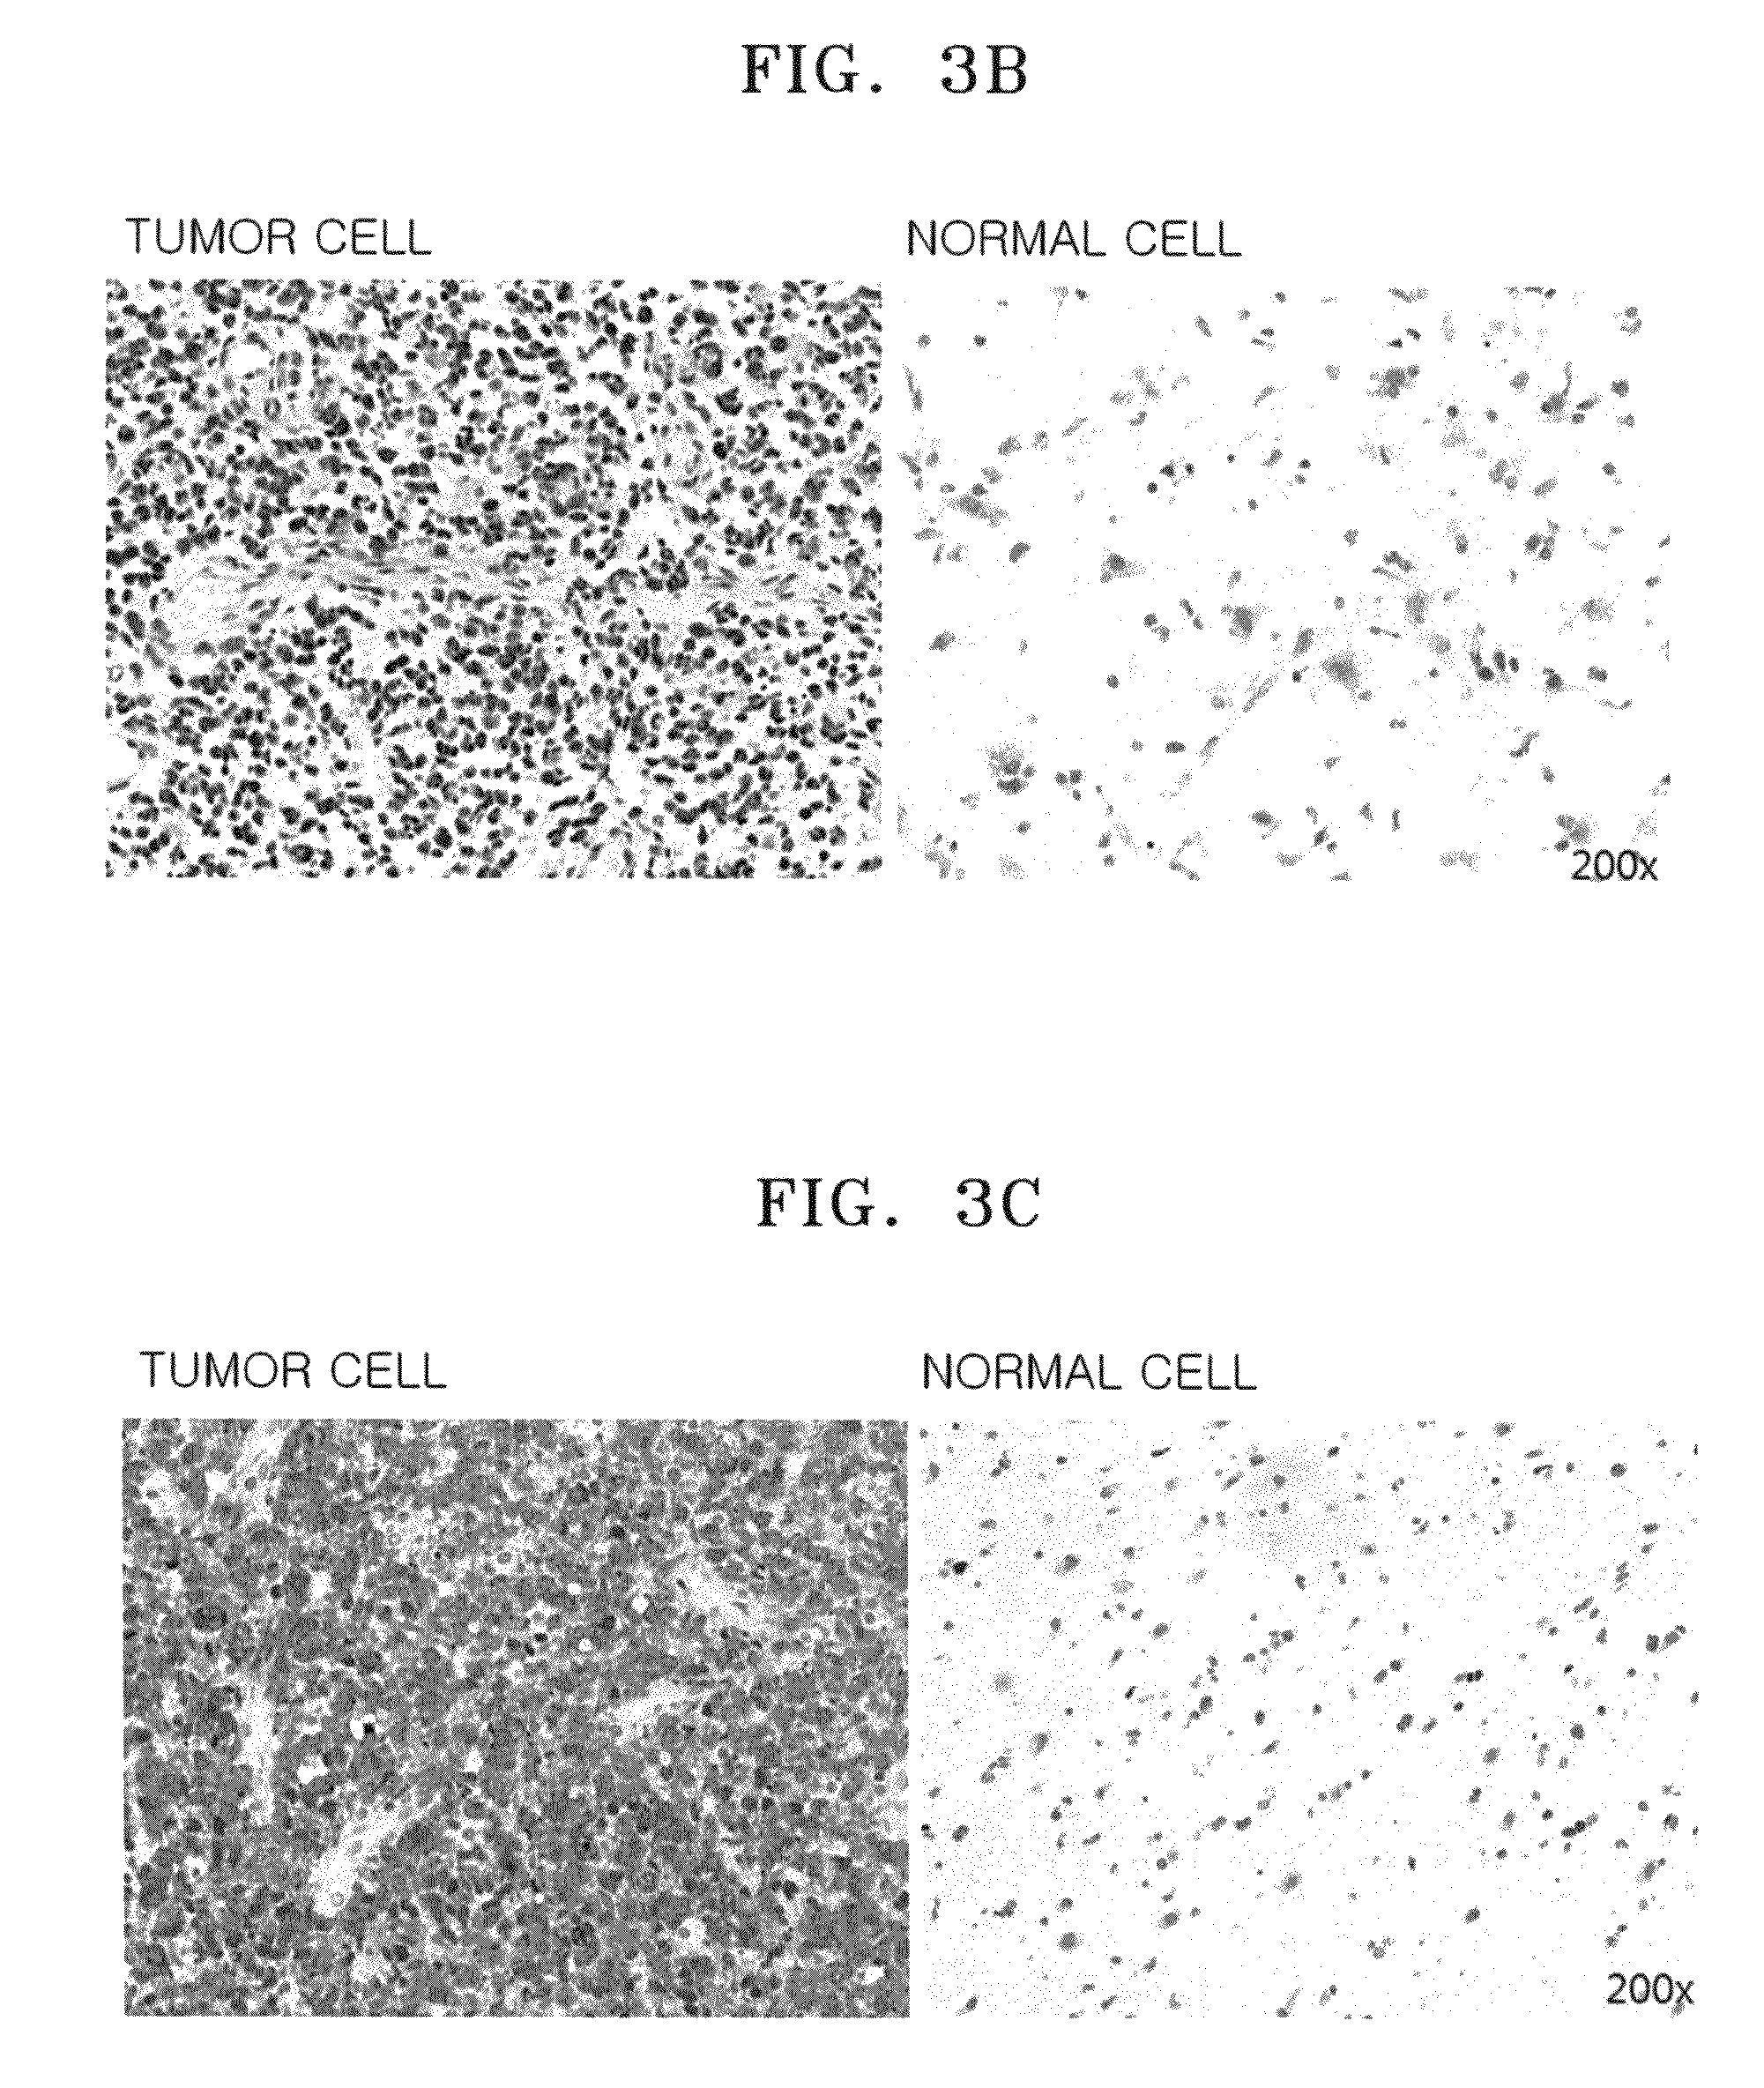 Antibody specifically binding to c-Met and methods of use